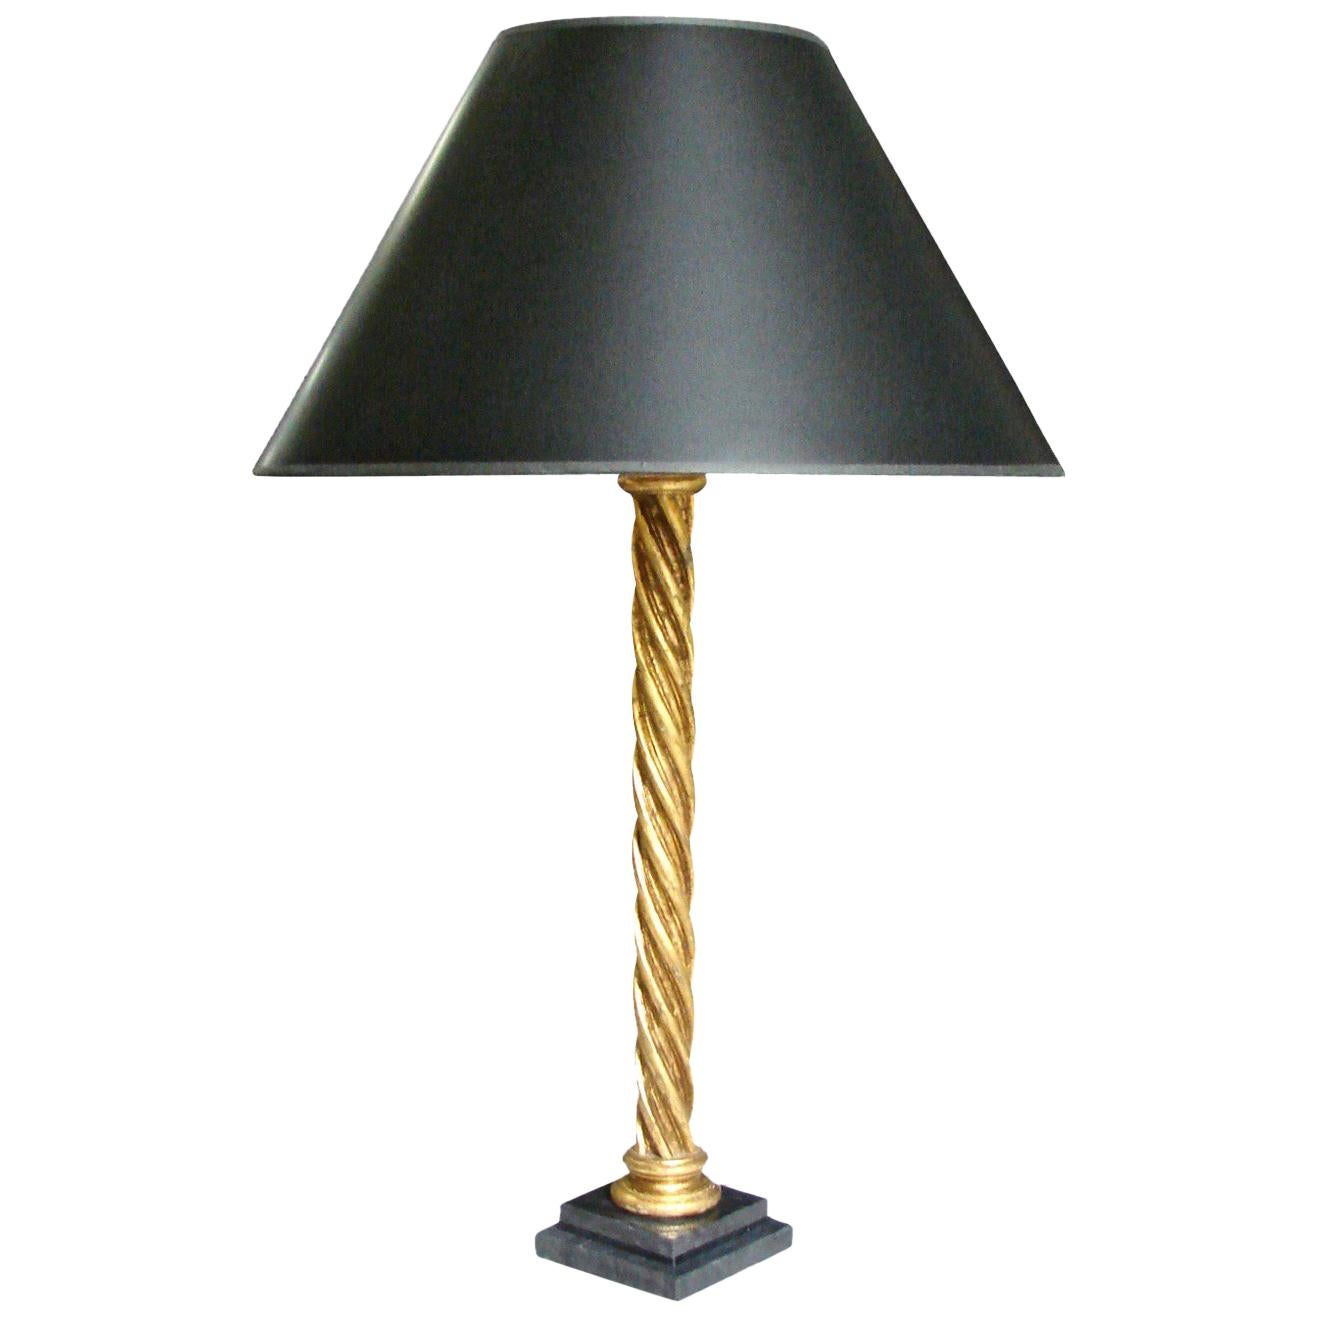 Giltwood Columnar Table Lamp with Black Shade